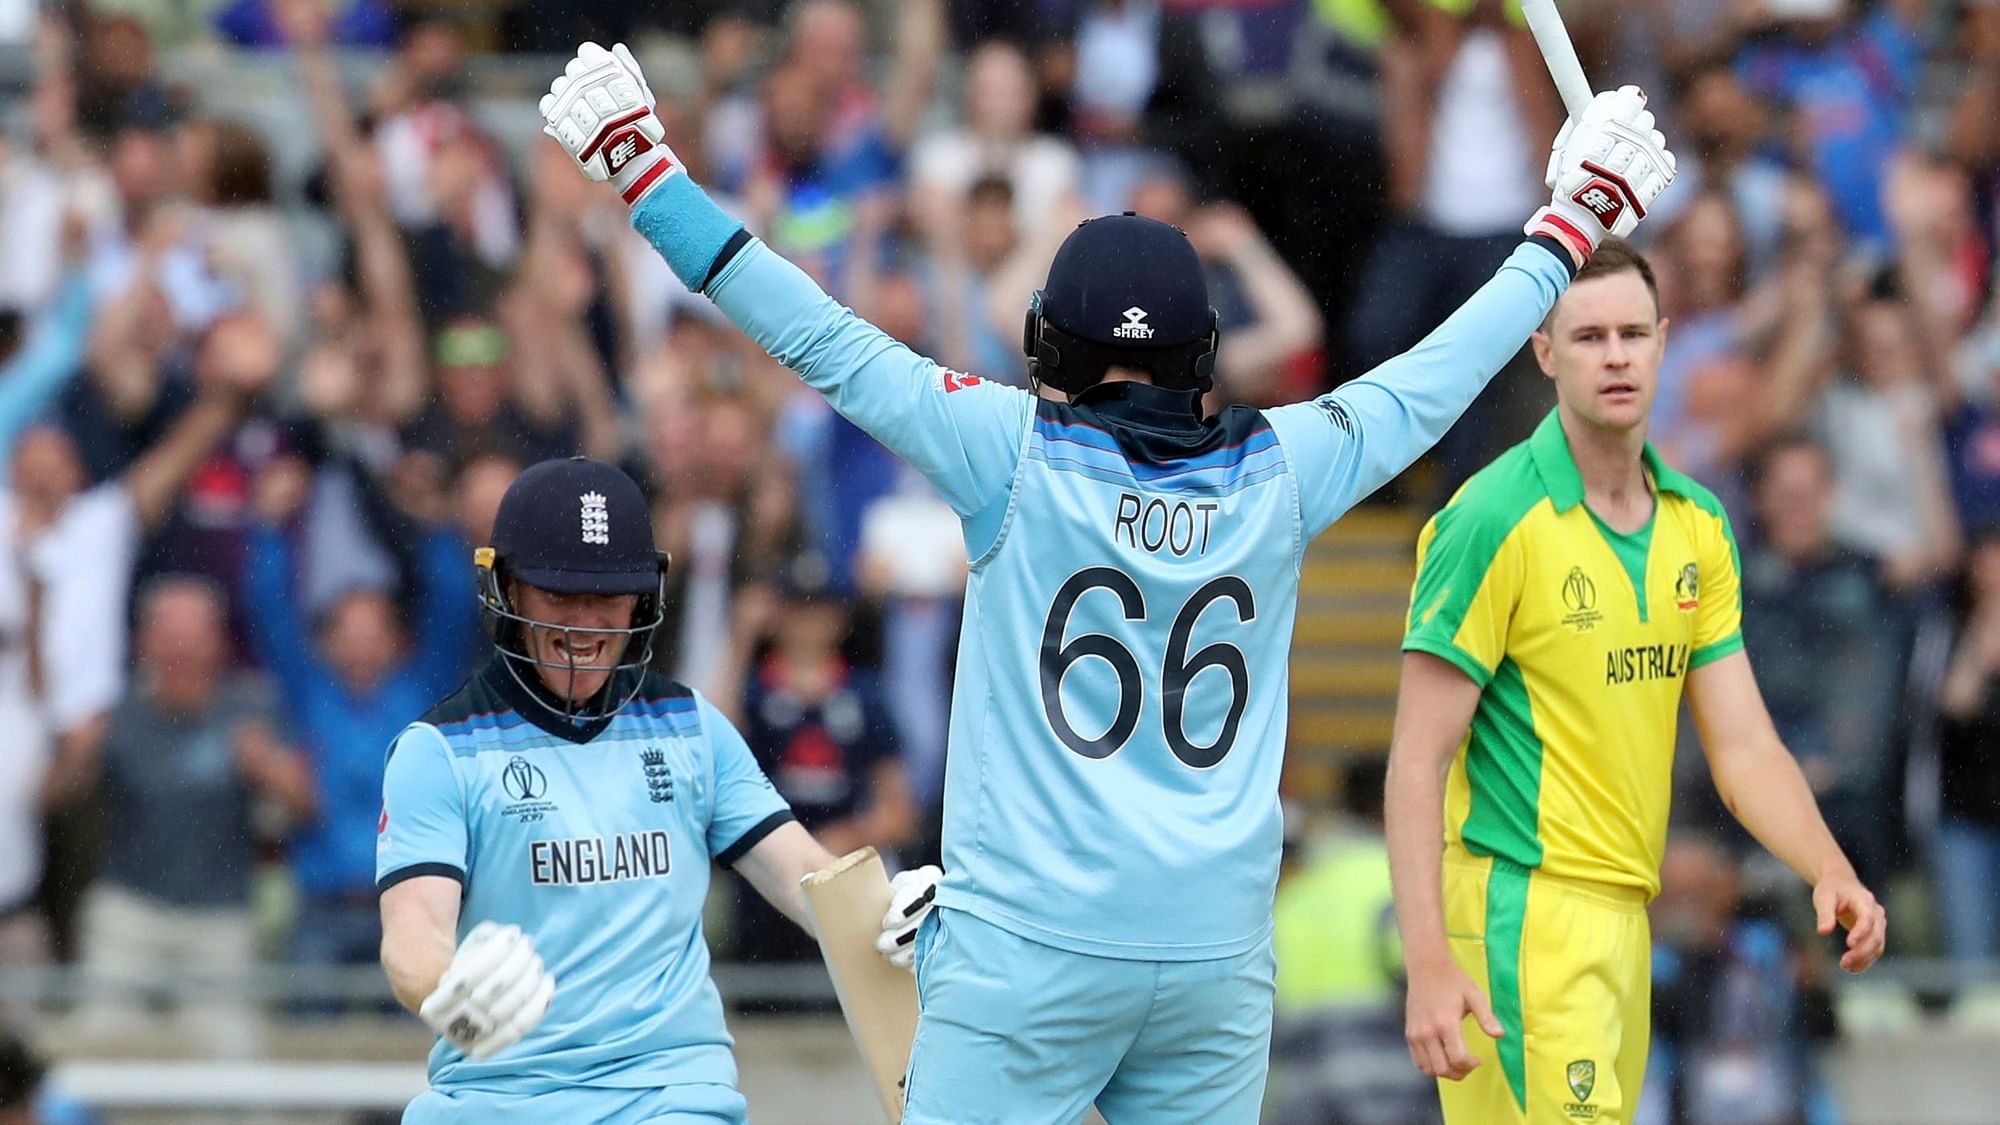 England’s captain Eoin Morgan, left, celebrates with teammate Joe Root after winning the Cricket World Cup semi-final match between Australia and England at Edgbaston in Birmingham.